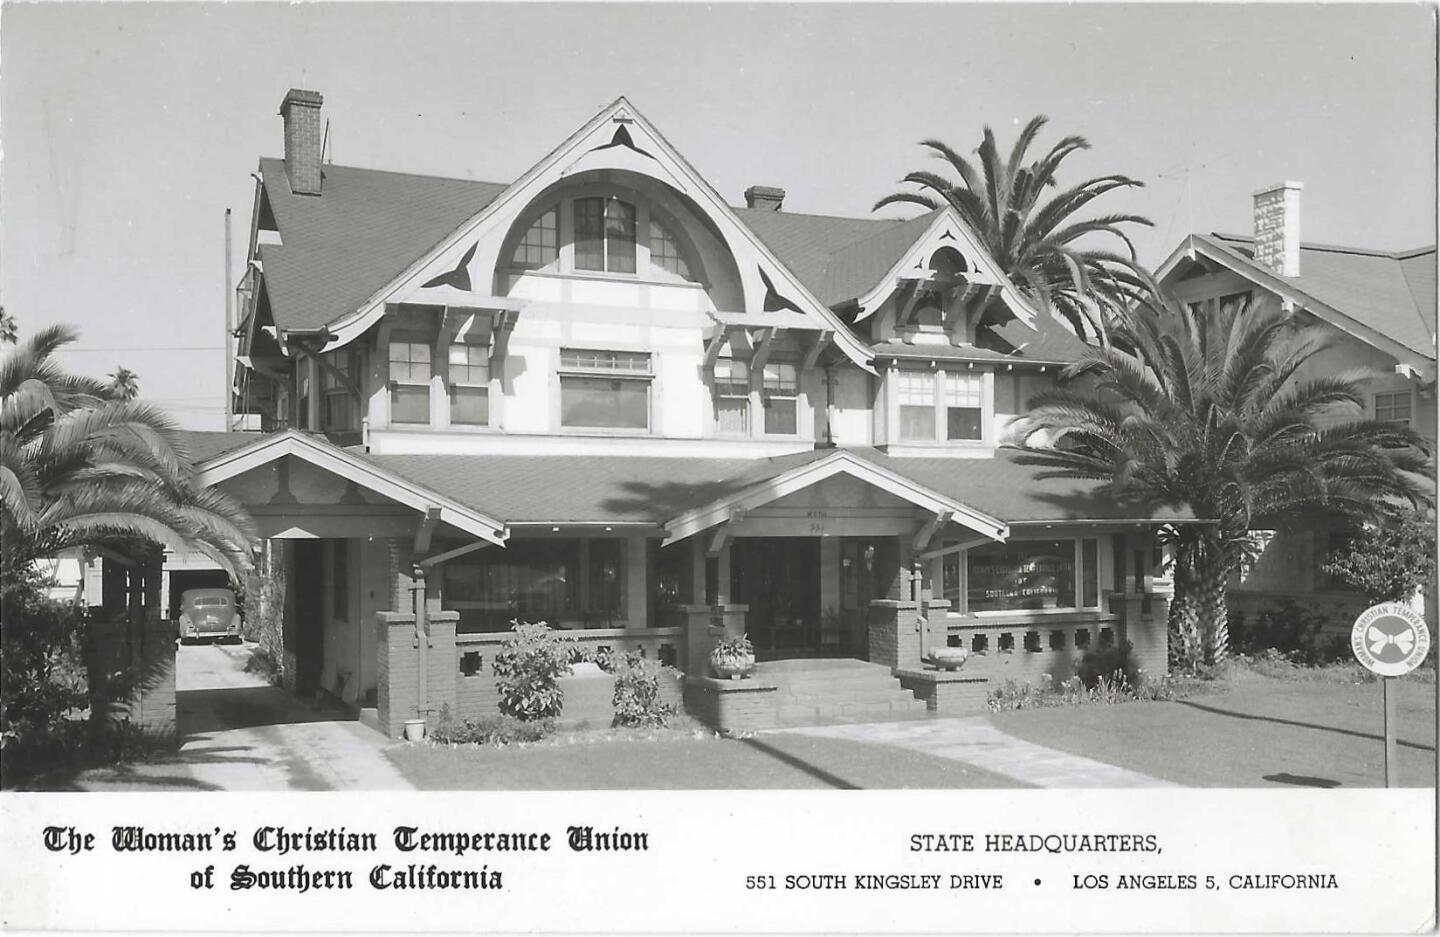 The California headquarters of the Women's Christian Temperance Union, seen on a vintage postcard from Patt Morrison's collection, were in a house that still stands.